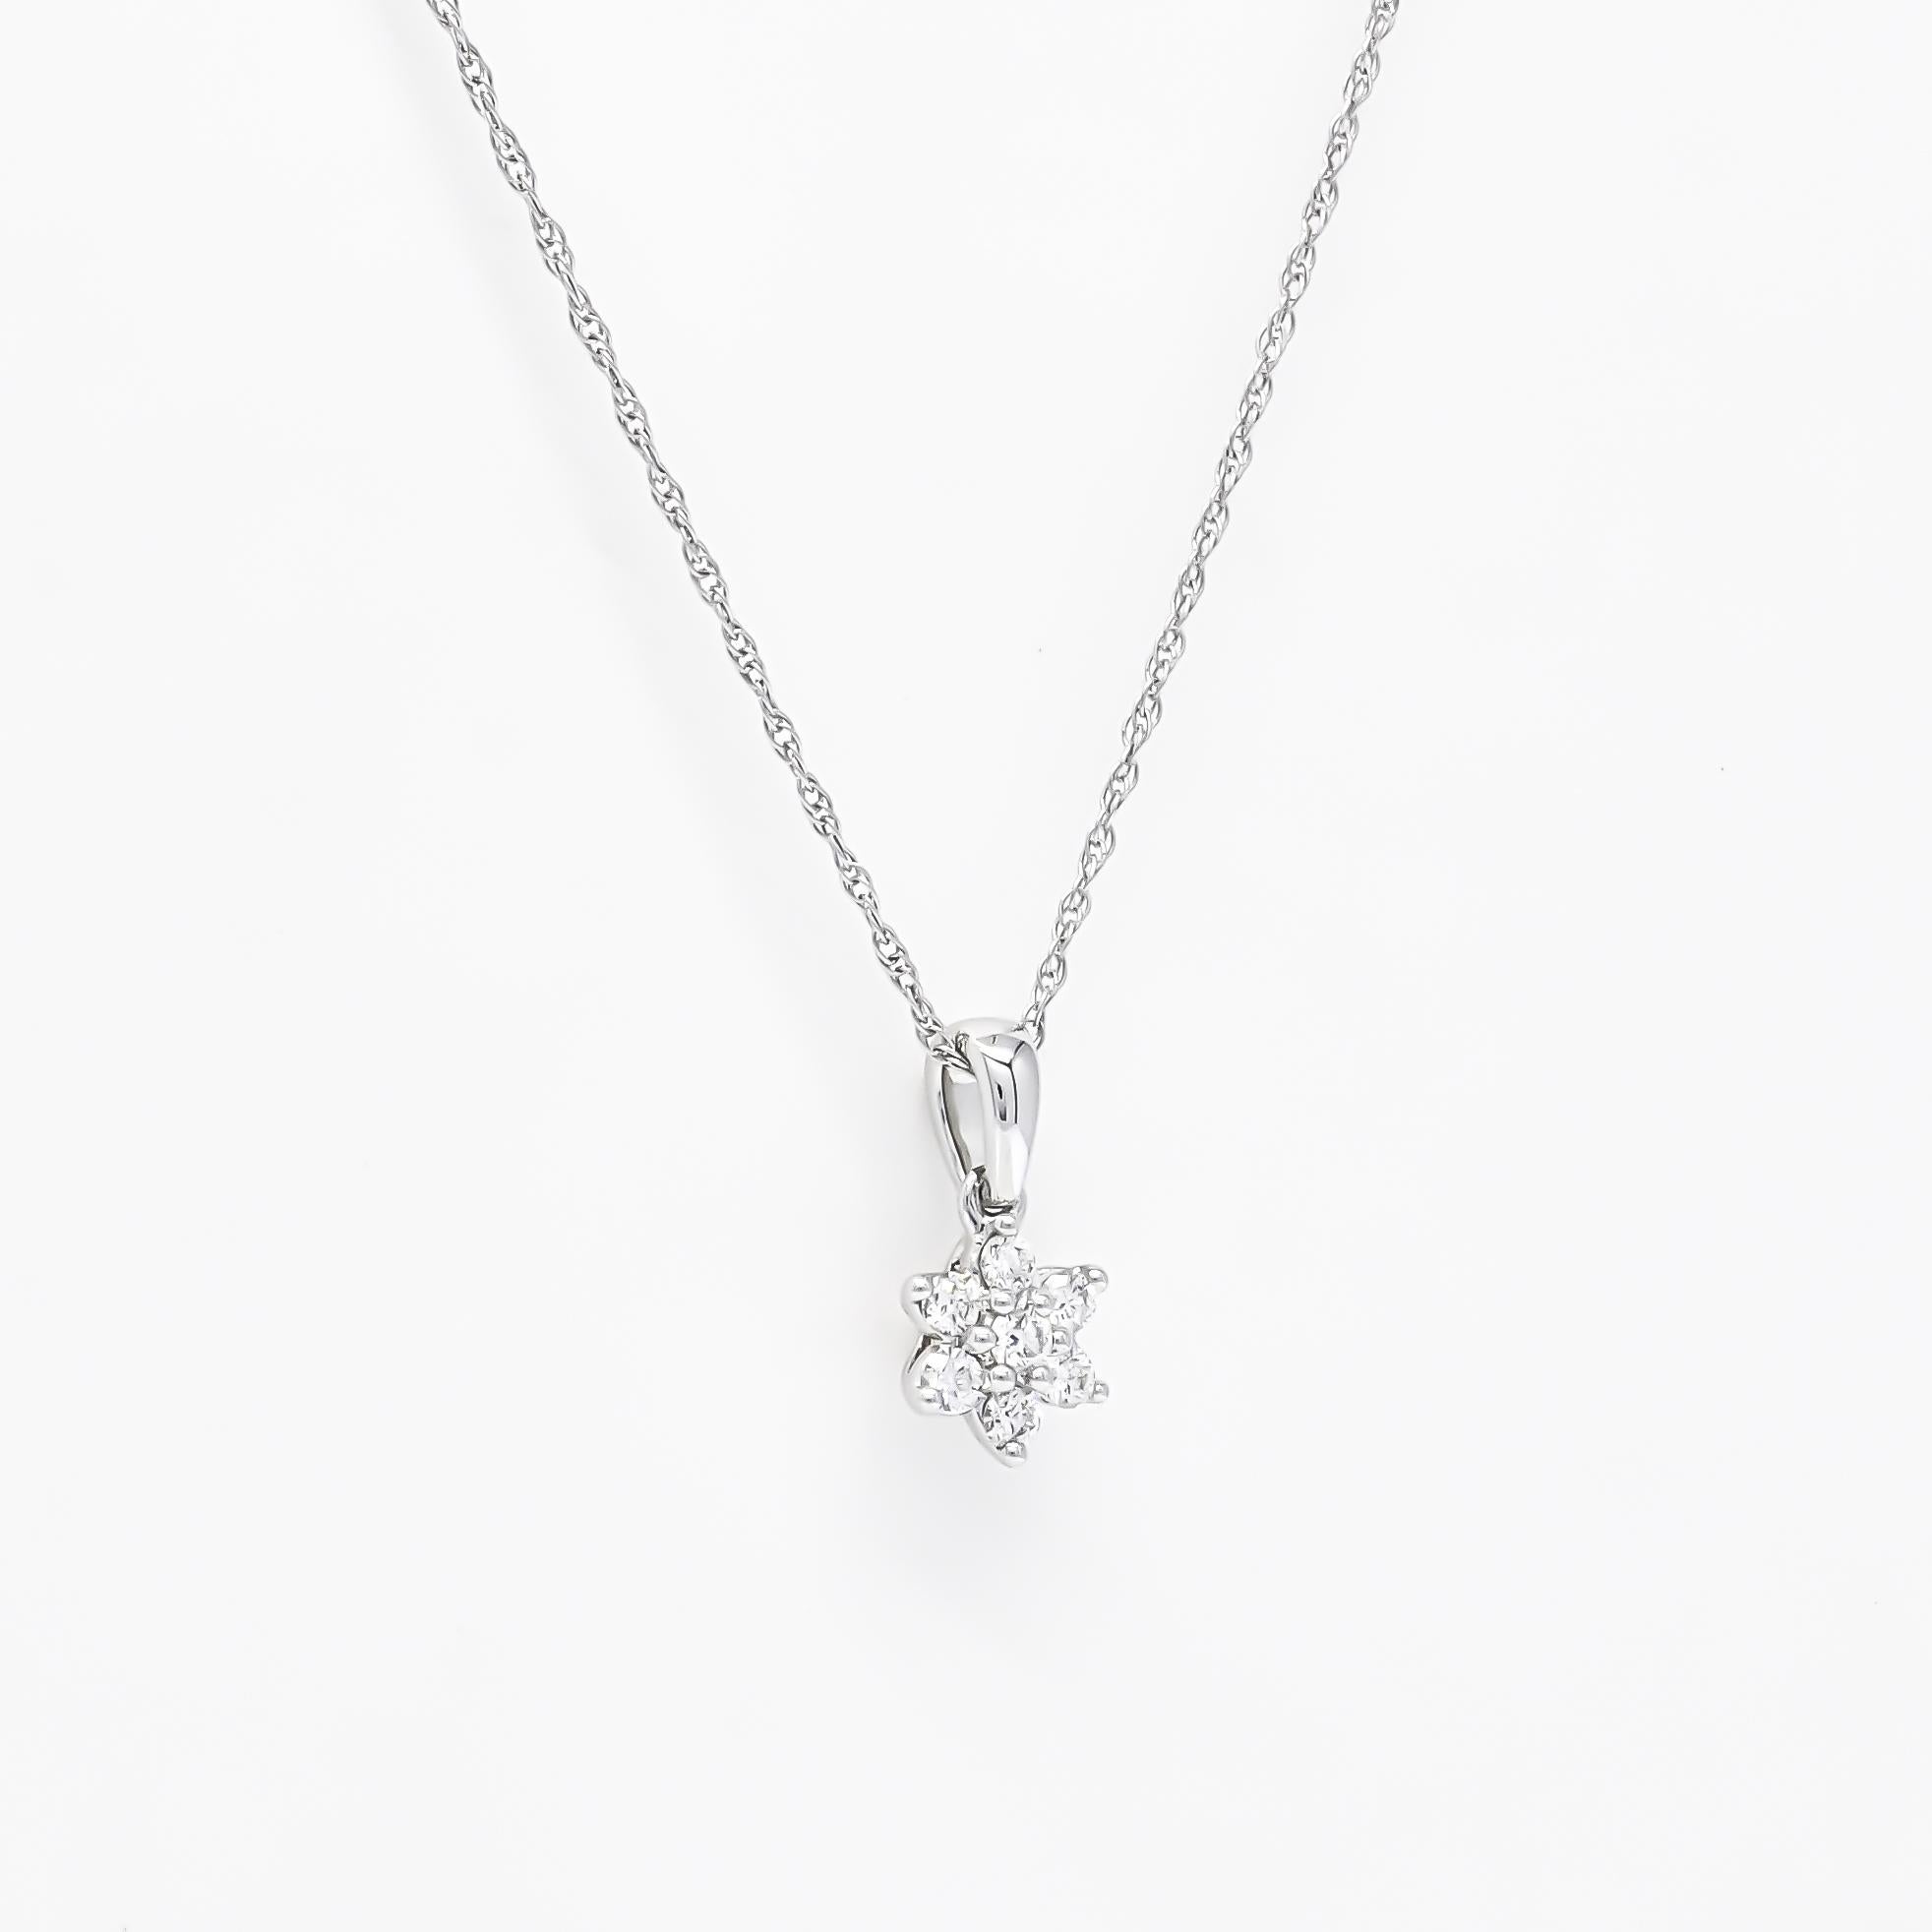 Round Cut Natural Diamond 0.16 carats 18KT White Gold Flower Pendant Chain Necklace For Sale